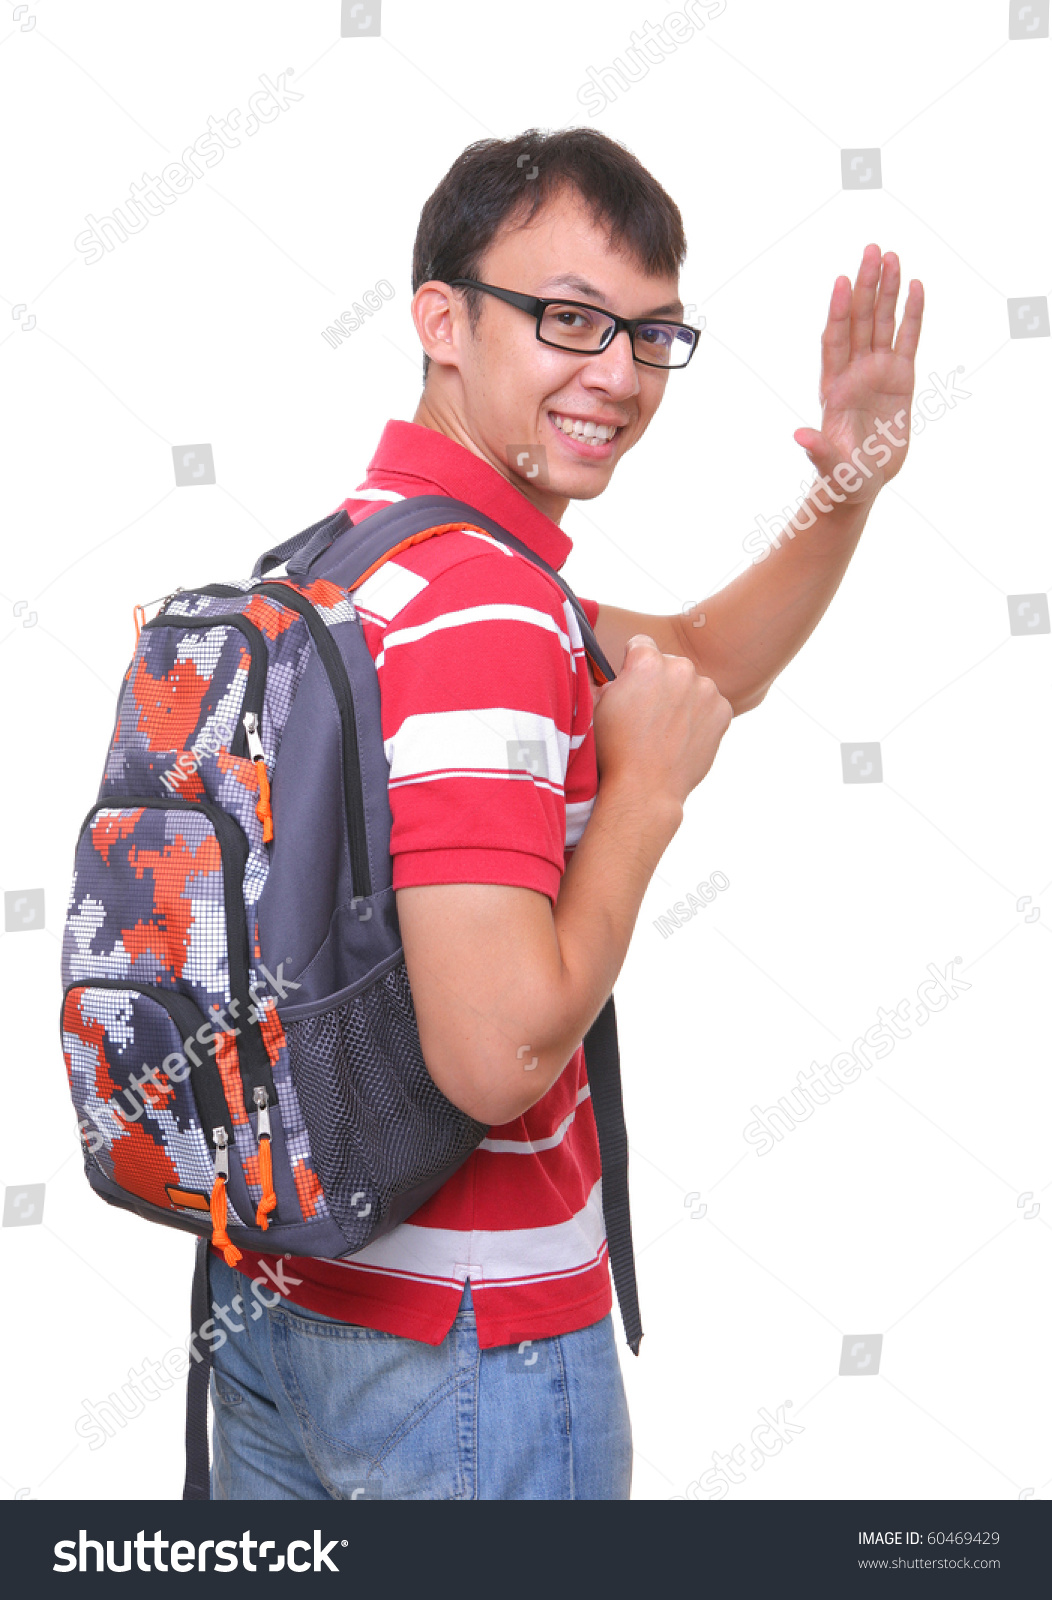 stock-photo-young-man-college-student-with-back-pack-and-glasses-leaving-60469429.jpg